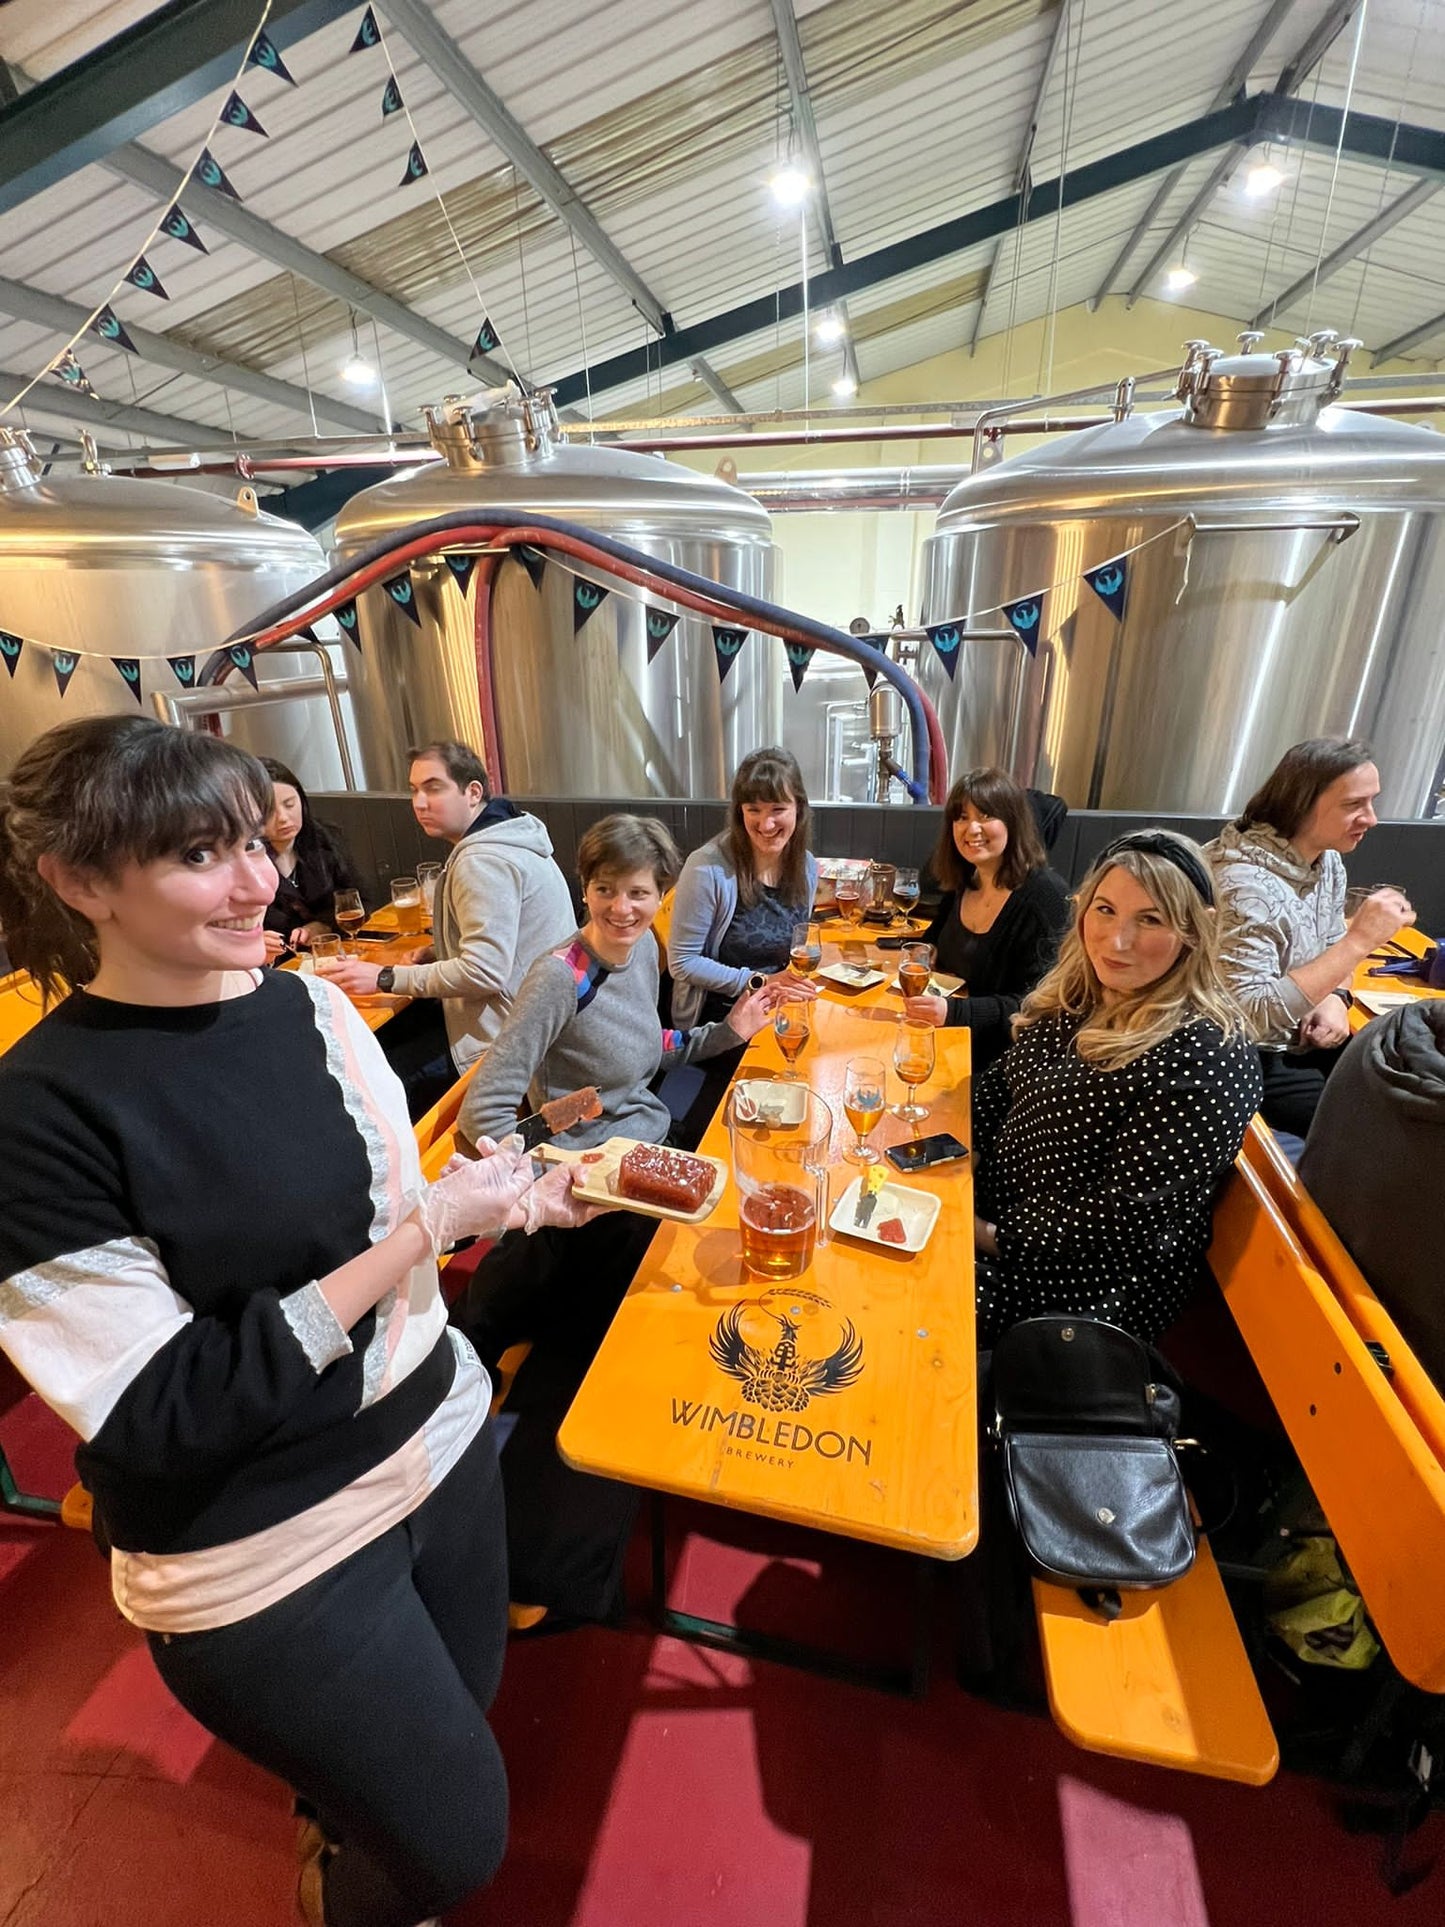 Beer and Cheese Pairing at the Wimbledon Brewery!